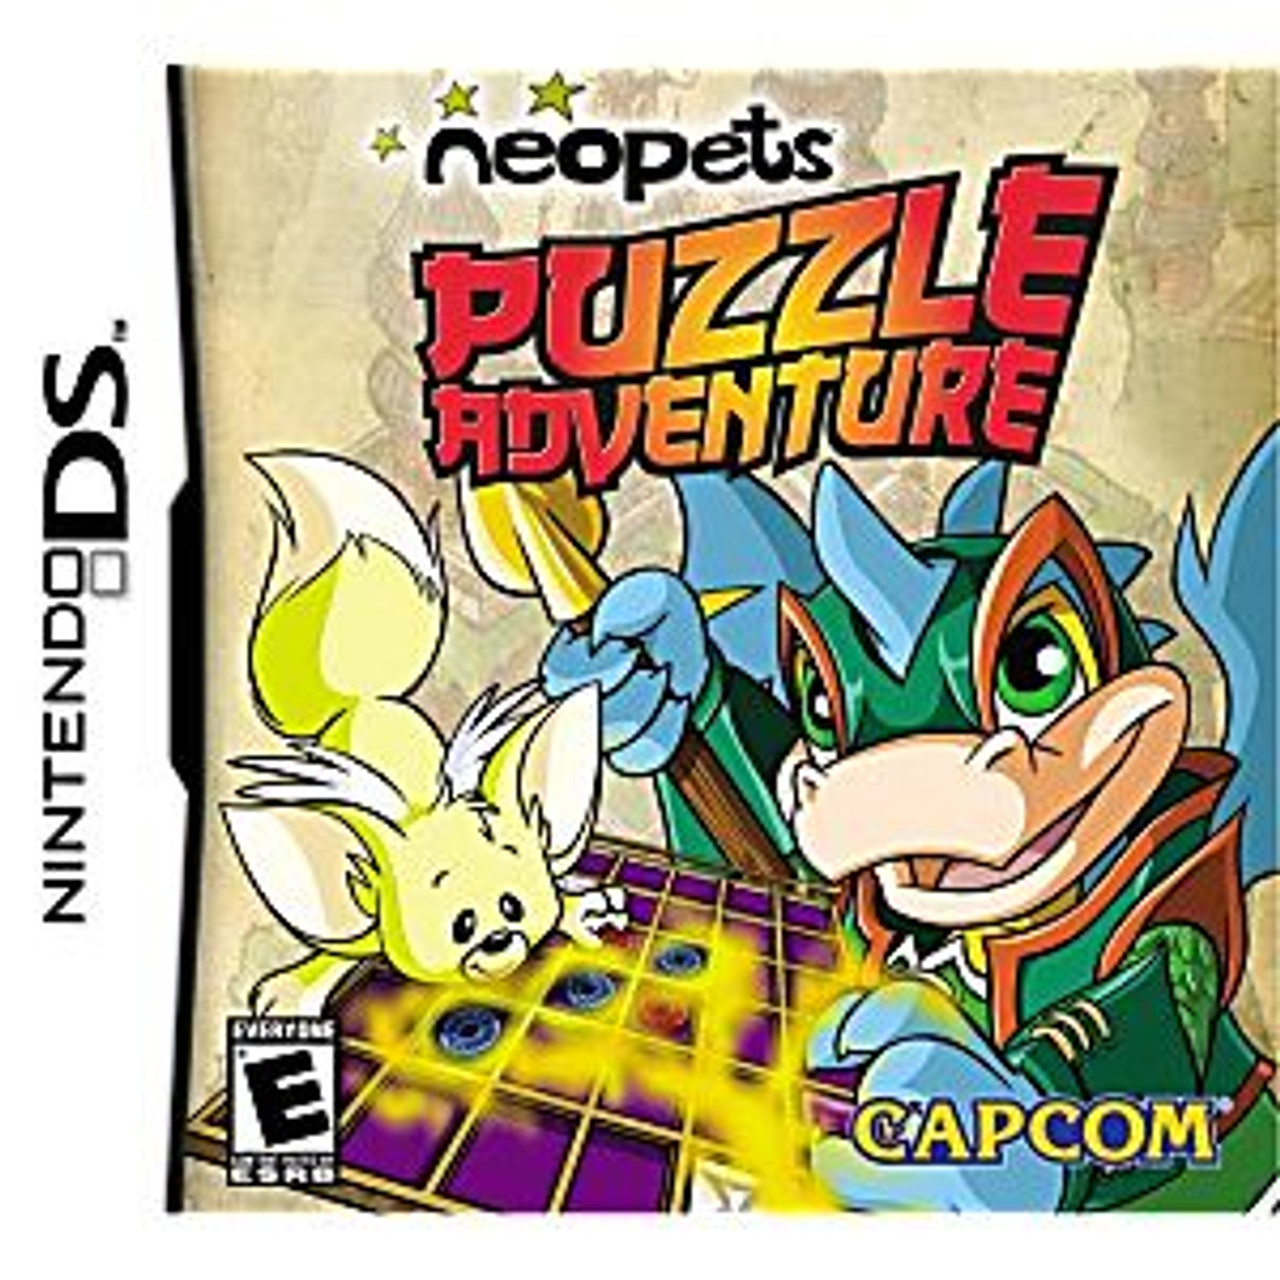 NEOPETS PUZZLE ADVENTURE - NDS